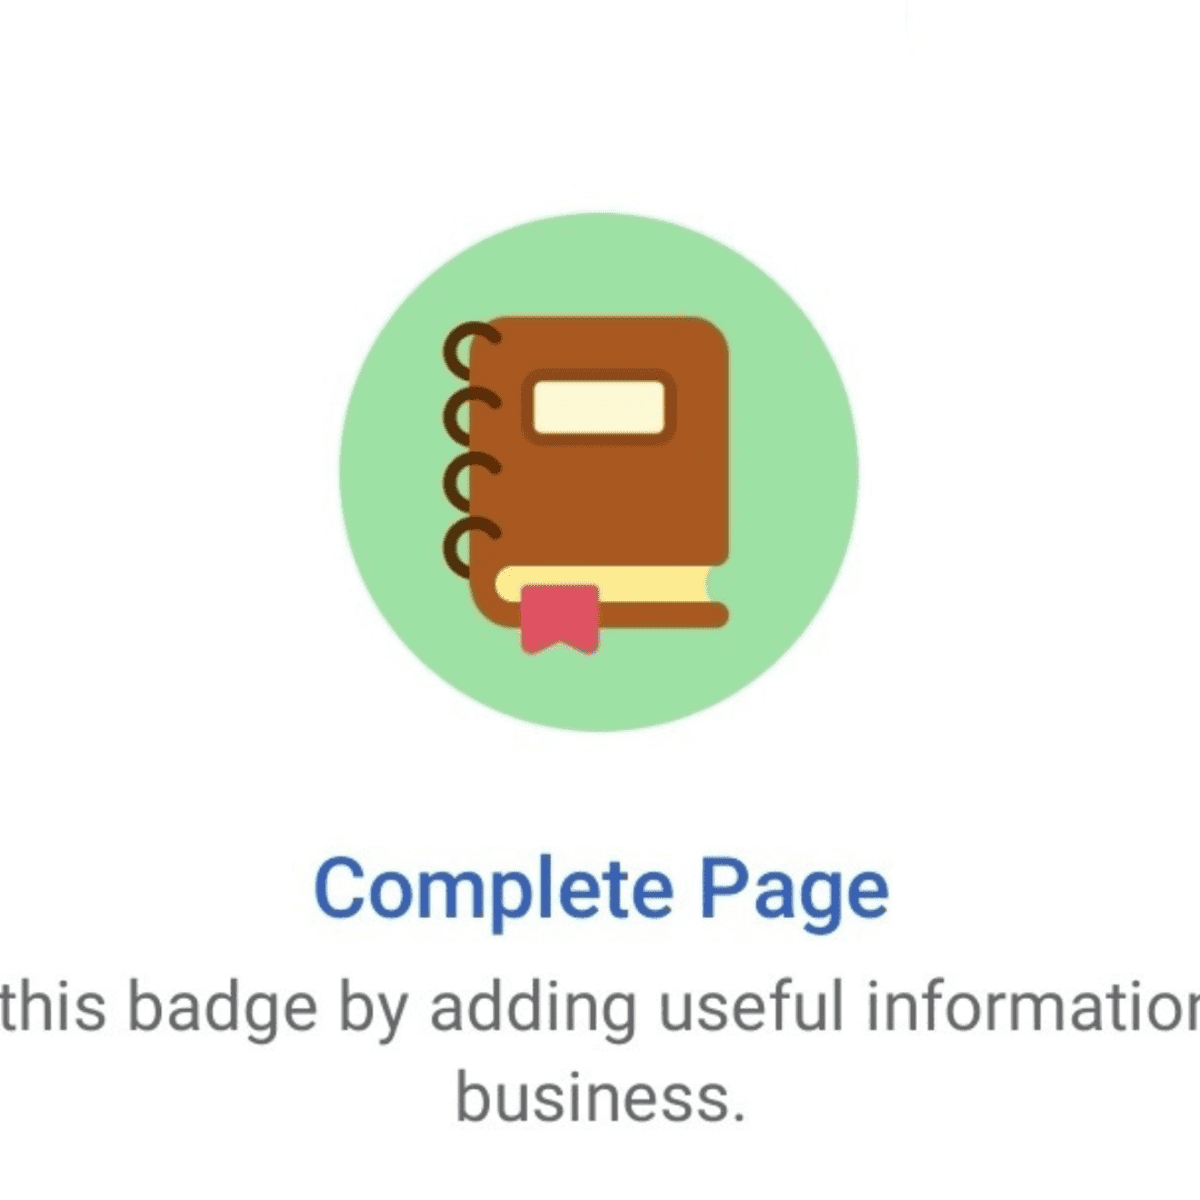 What Are All the Facebook Badges – A Full List